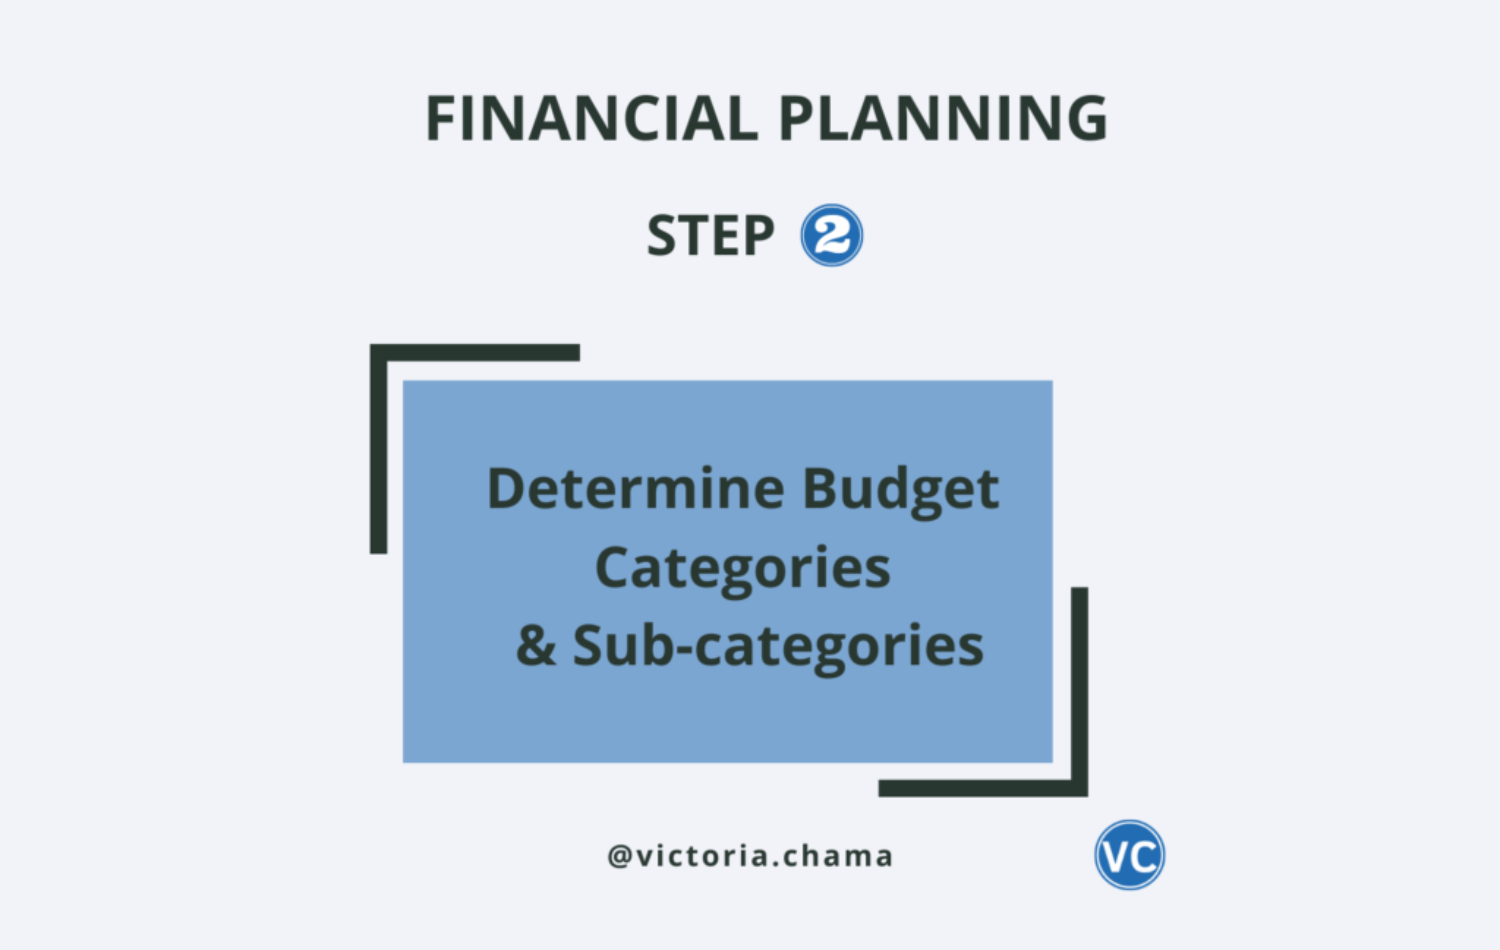 Determine Budget Categories and sub-categories